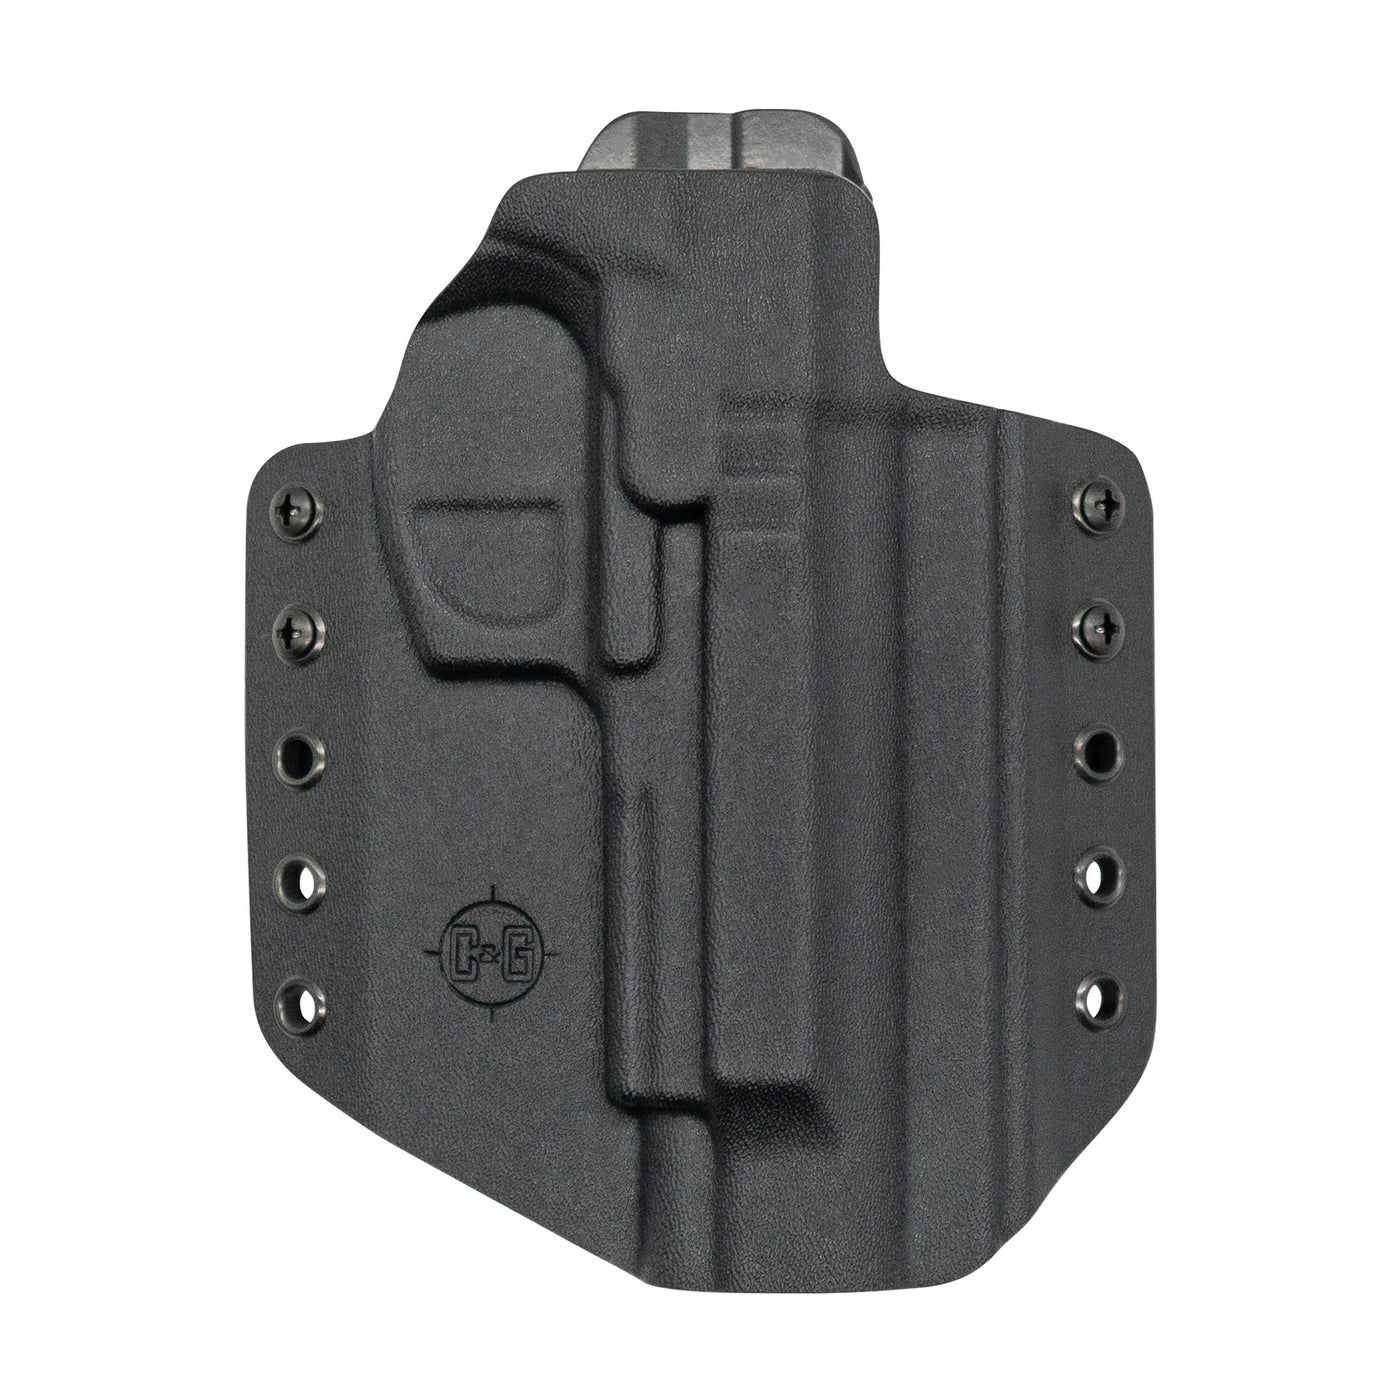 This is the C&G Holsters Covert series OWB (Outside the waistband) holster for the Beretta M9A1 M9A3 and Vertec in right hand and black.